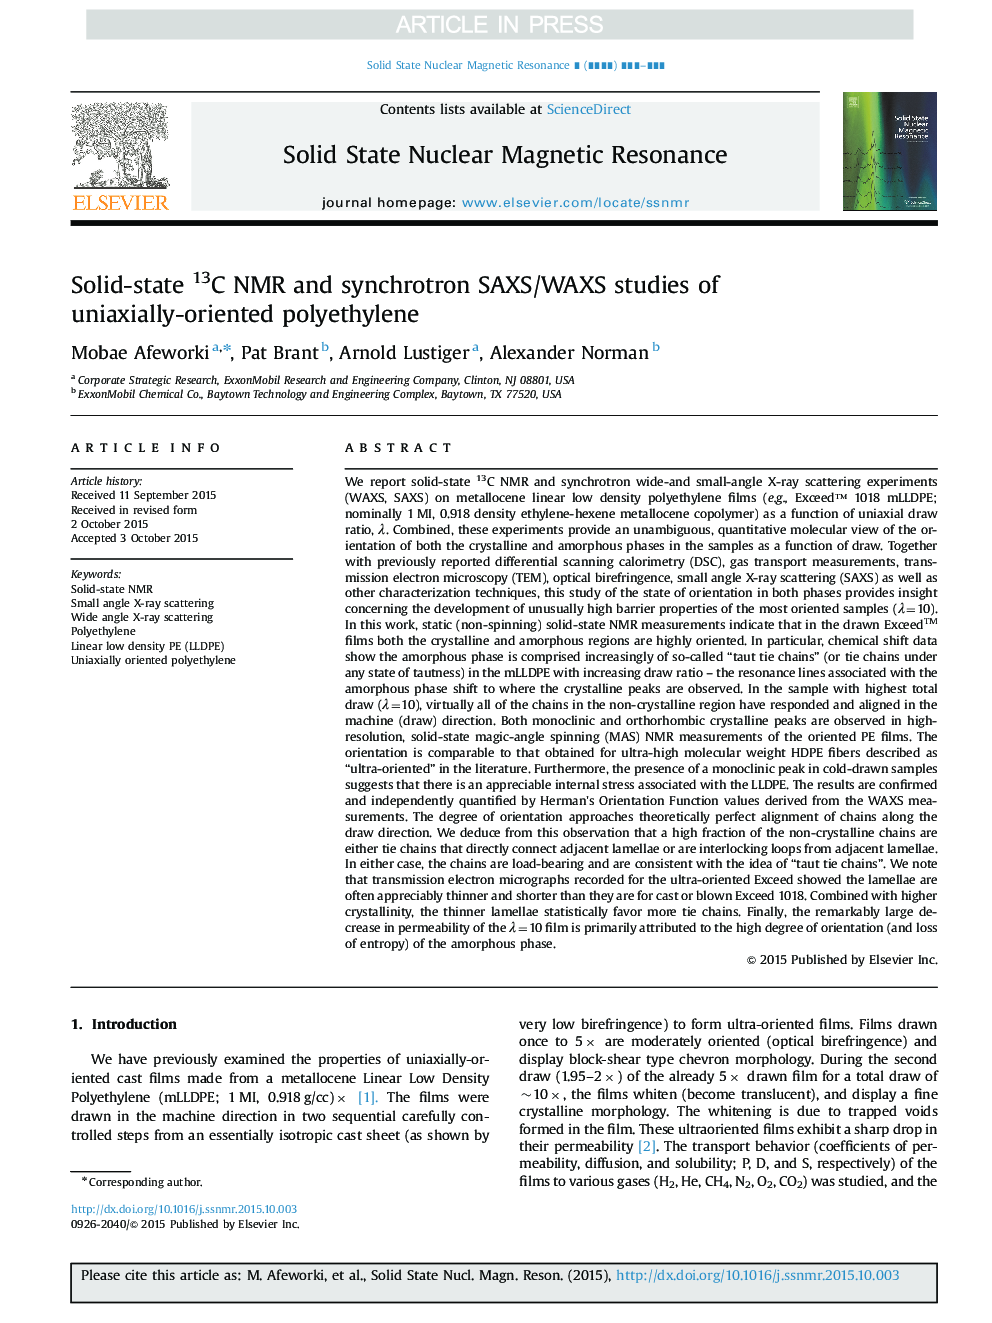 Solid-state 13C NMR and synchrotron SAXS/WAXS studies of uniaxially-oriented polyethylene